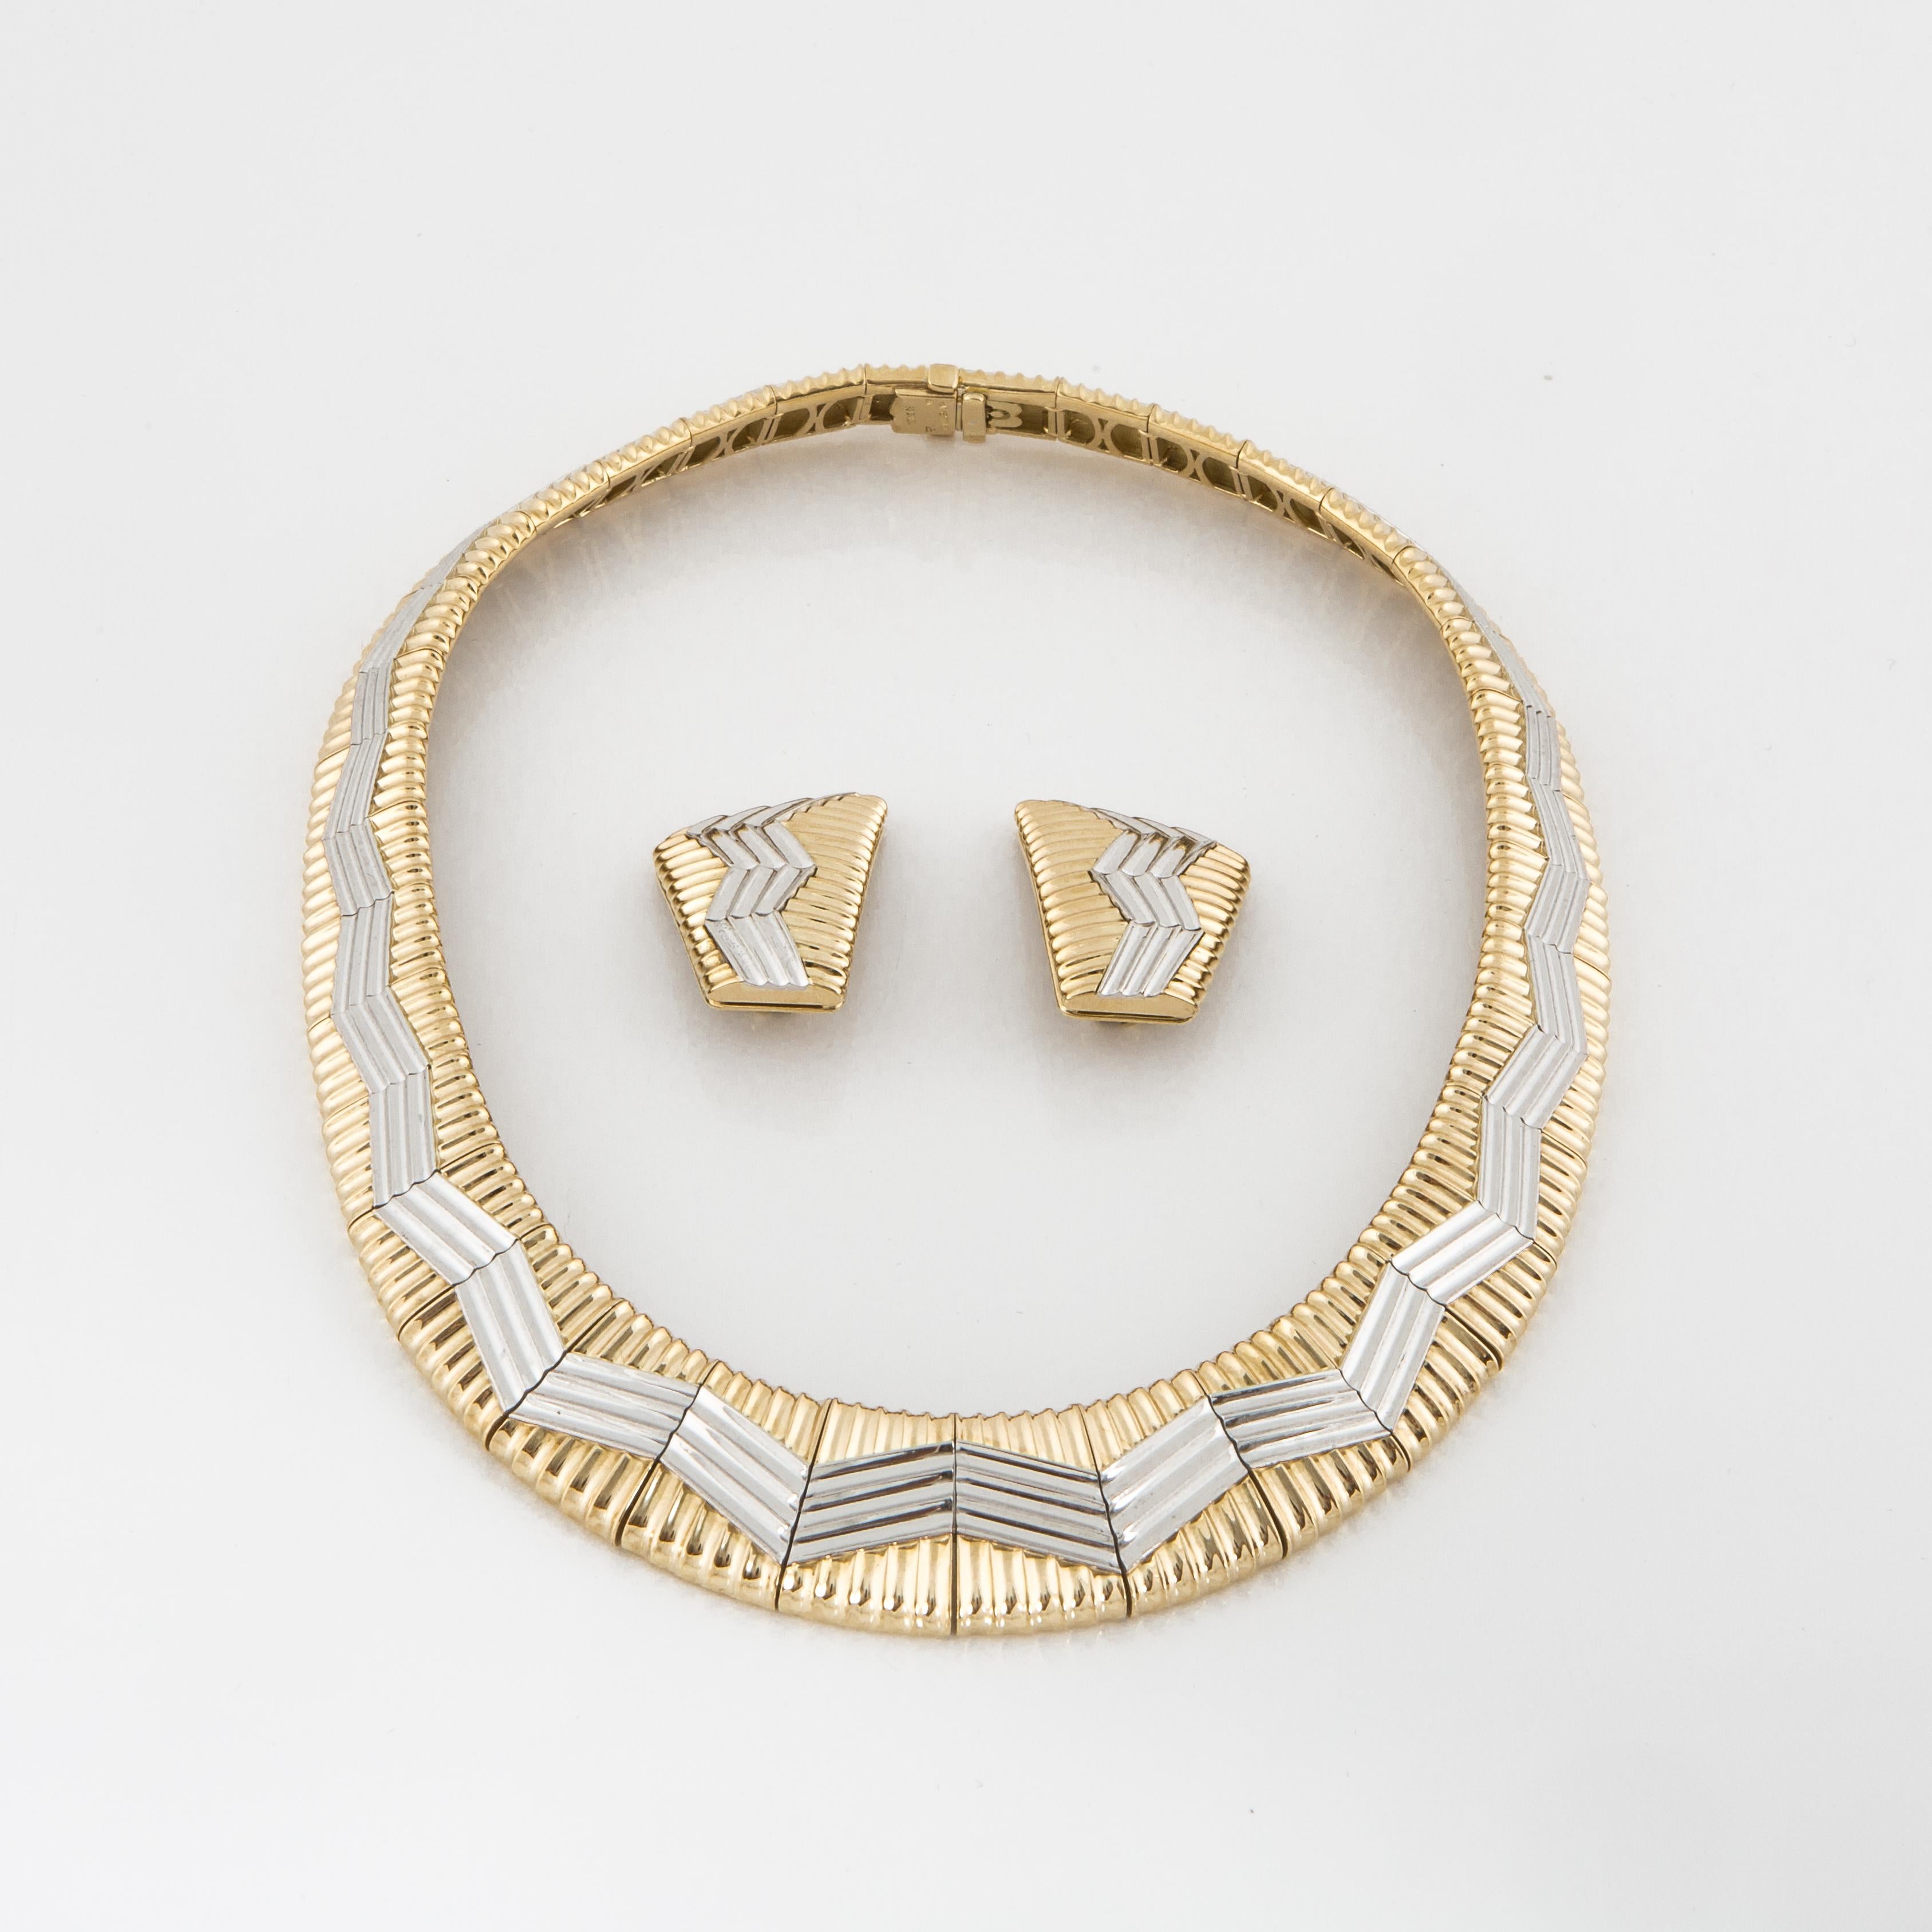 18K yellow gold and platinum necklace with matching earrings by Michael Bondanza.  Features a zig zag pattern on top in platinum and set into yellow gold.  Necklace measures 17 inches long and 3/4 inches at the widest point.  The earrings are clip